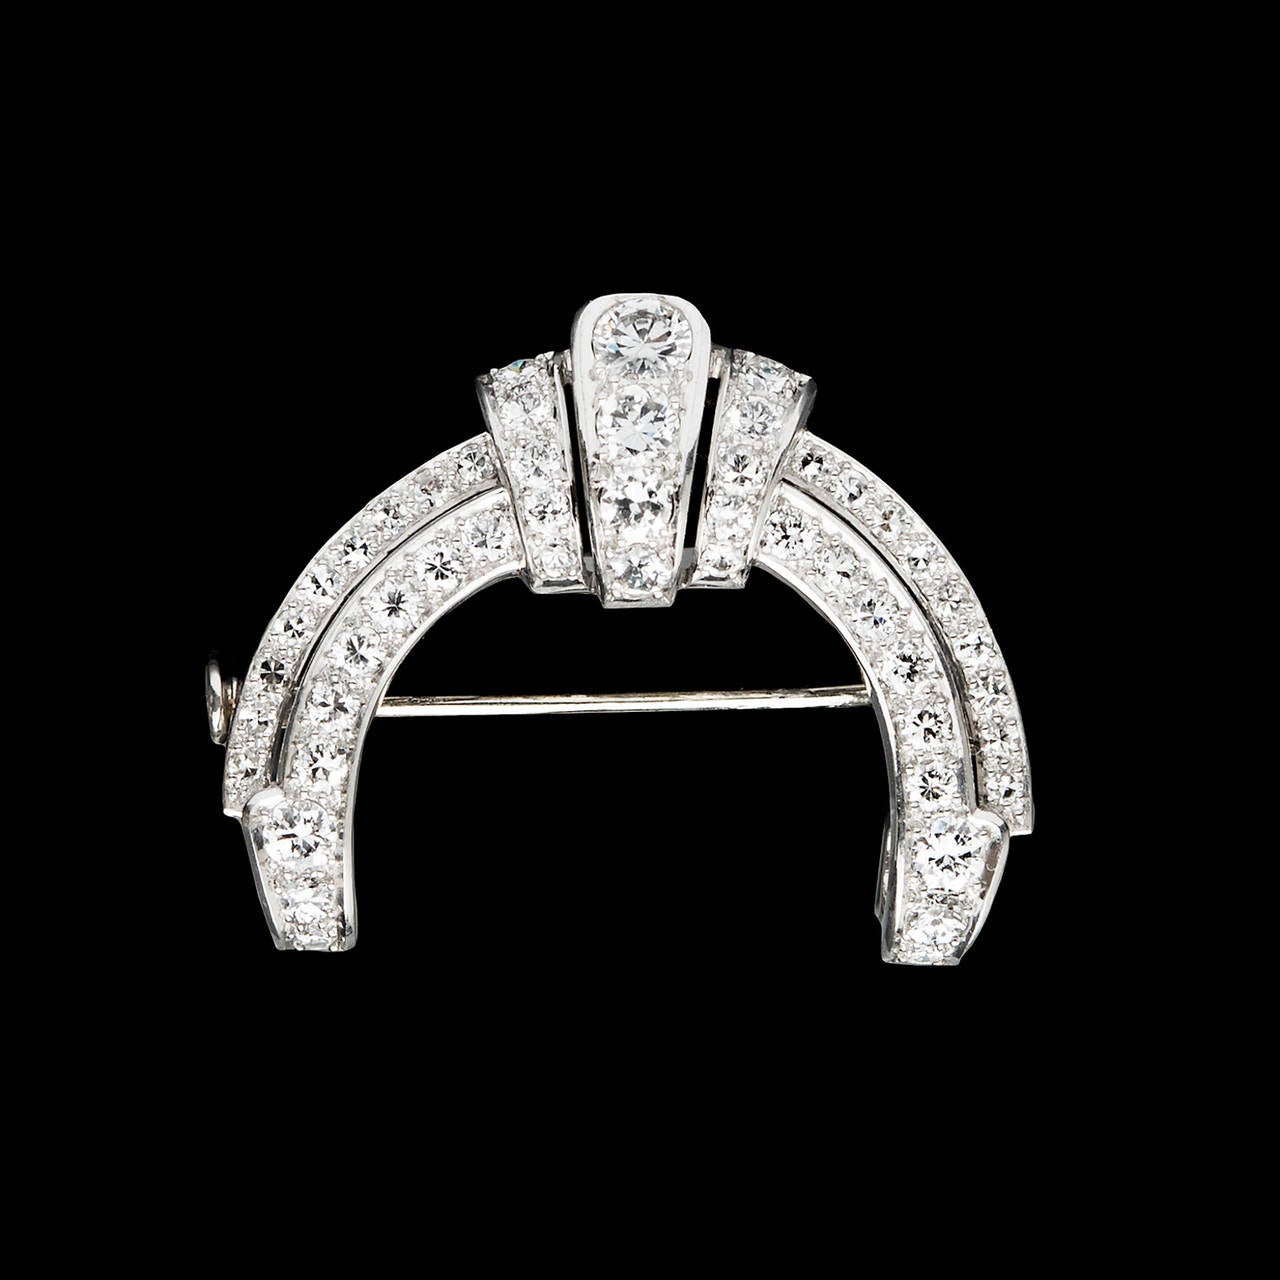 Platinum Art Deco Brooch with 50 Full Cut Diamonds for a Total Approximate Weight of 1.90 Carats. The brooch measures 1.00 x 1.25 inches and weighs 7.5 grams.